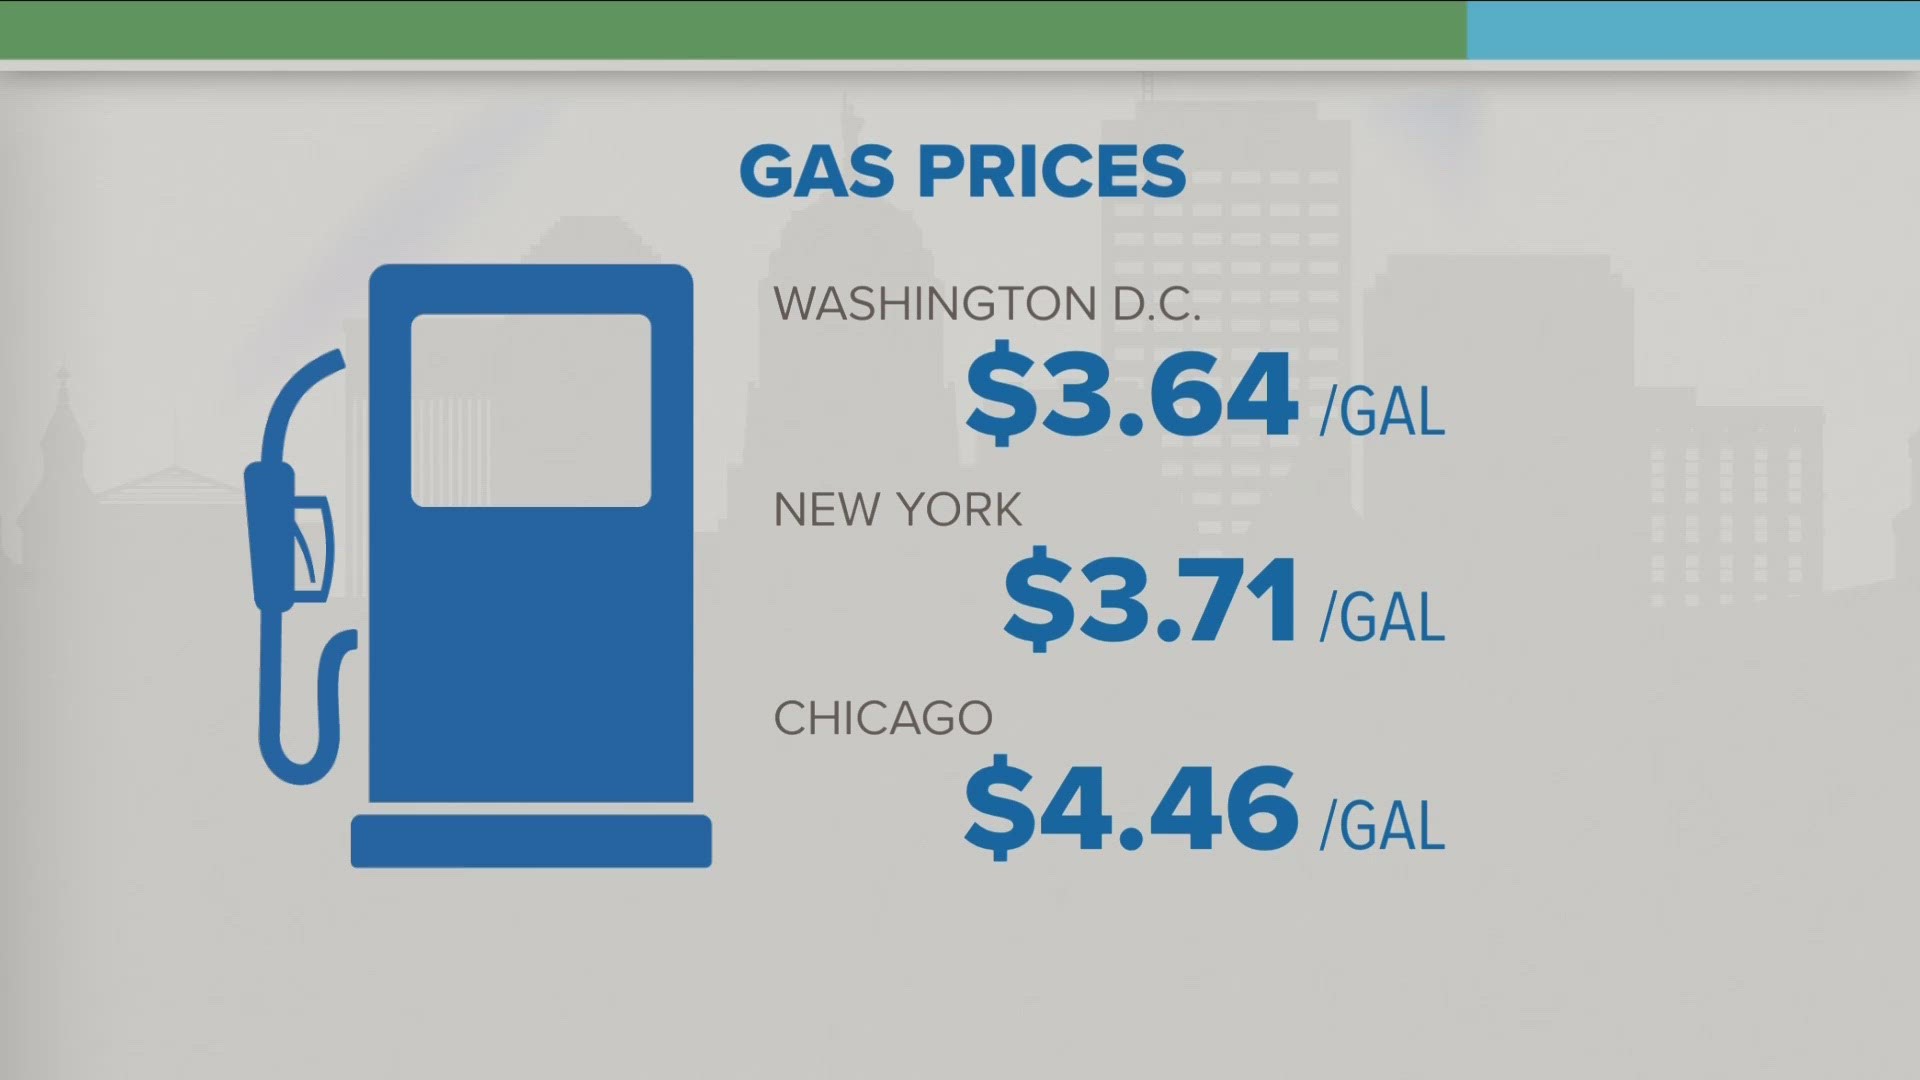 An estimated 37 million Americans will be out on the roads. A bit of good news: as prices are cheaper compared to last year.